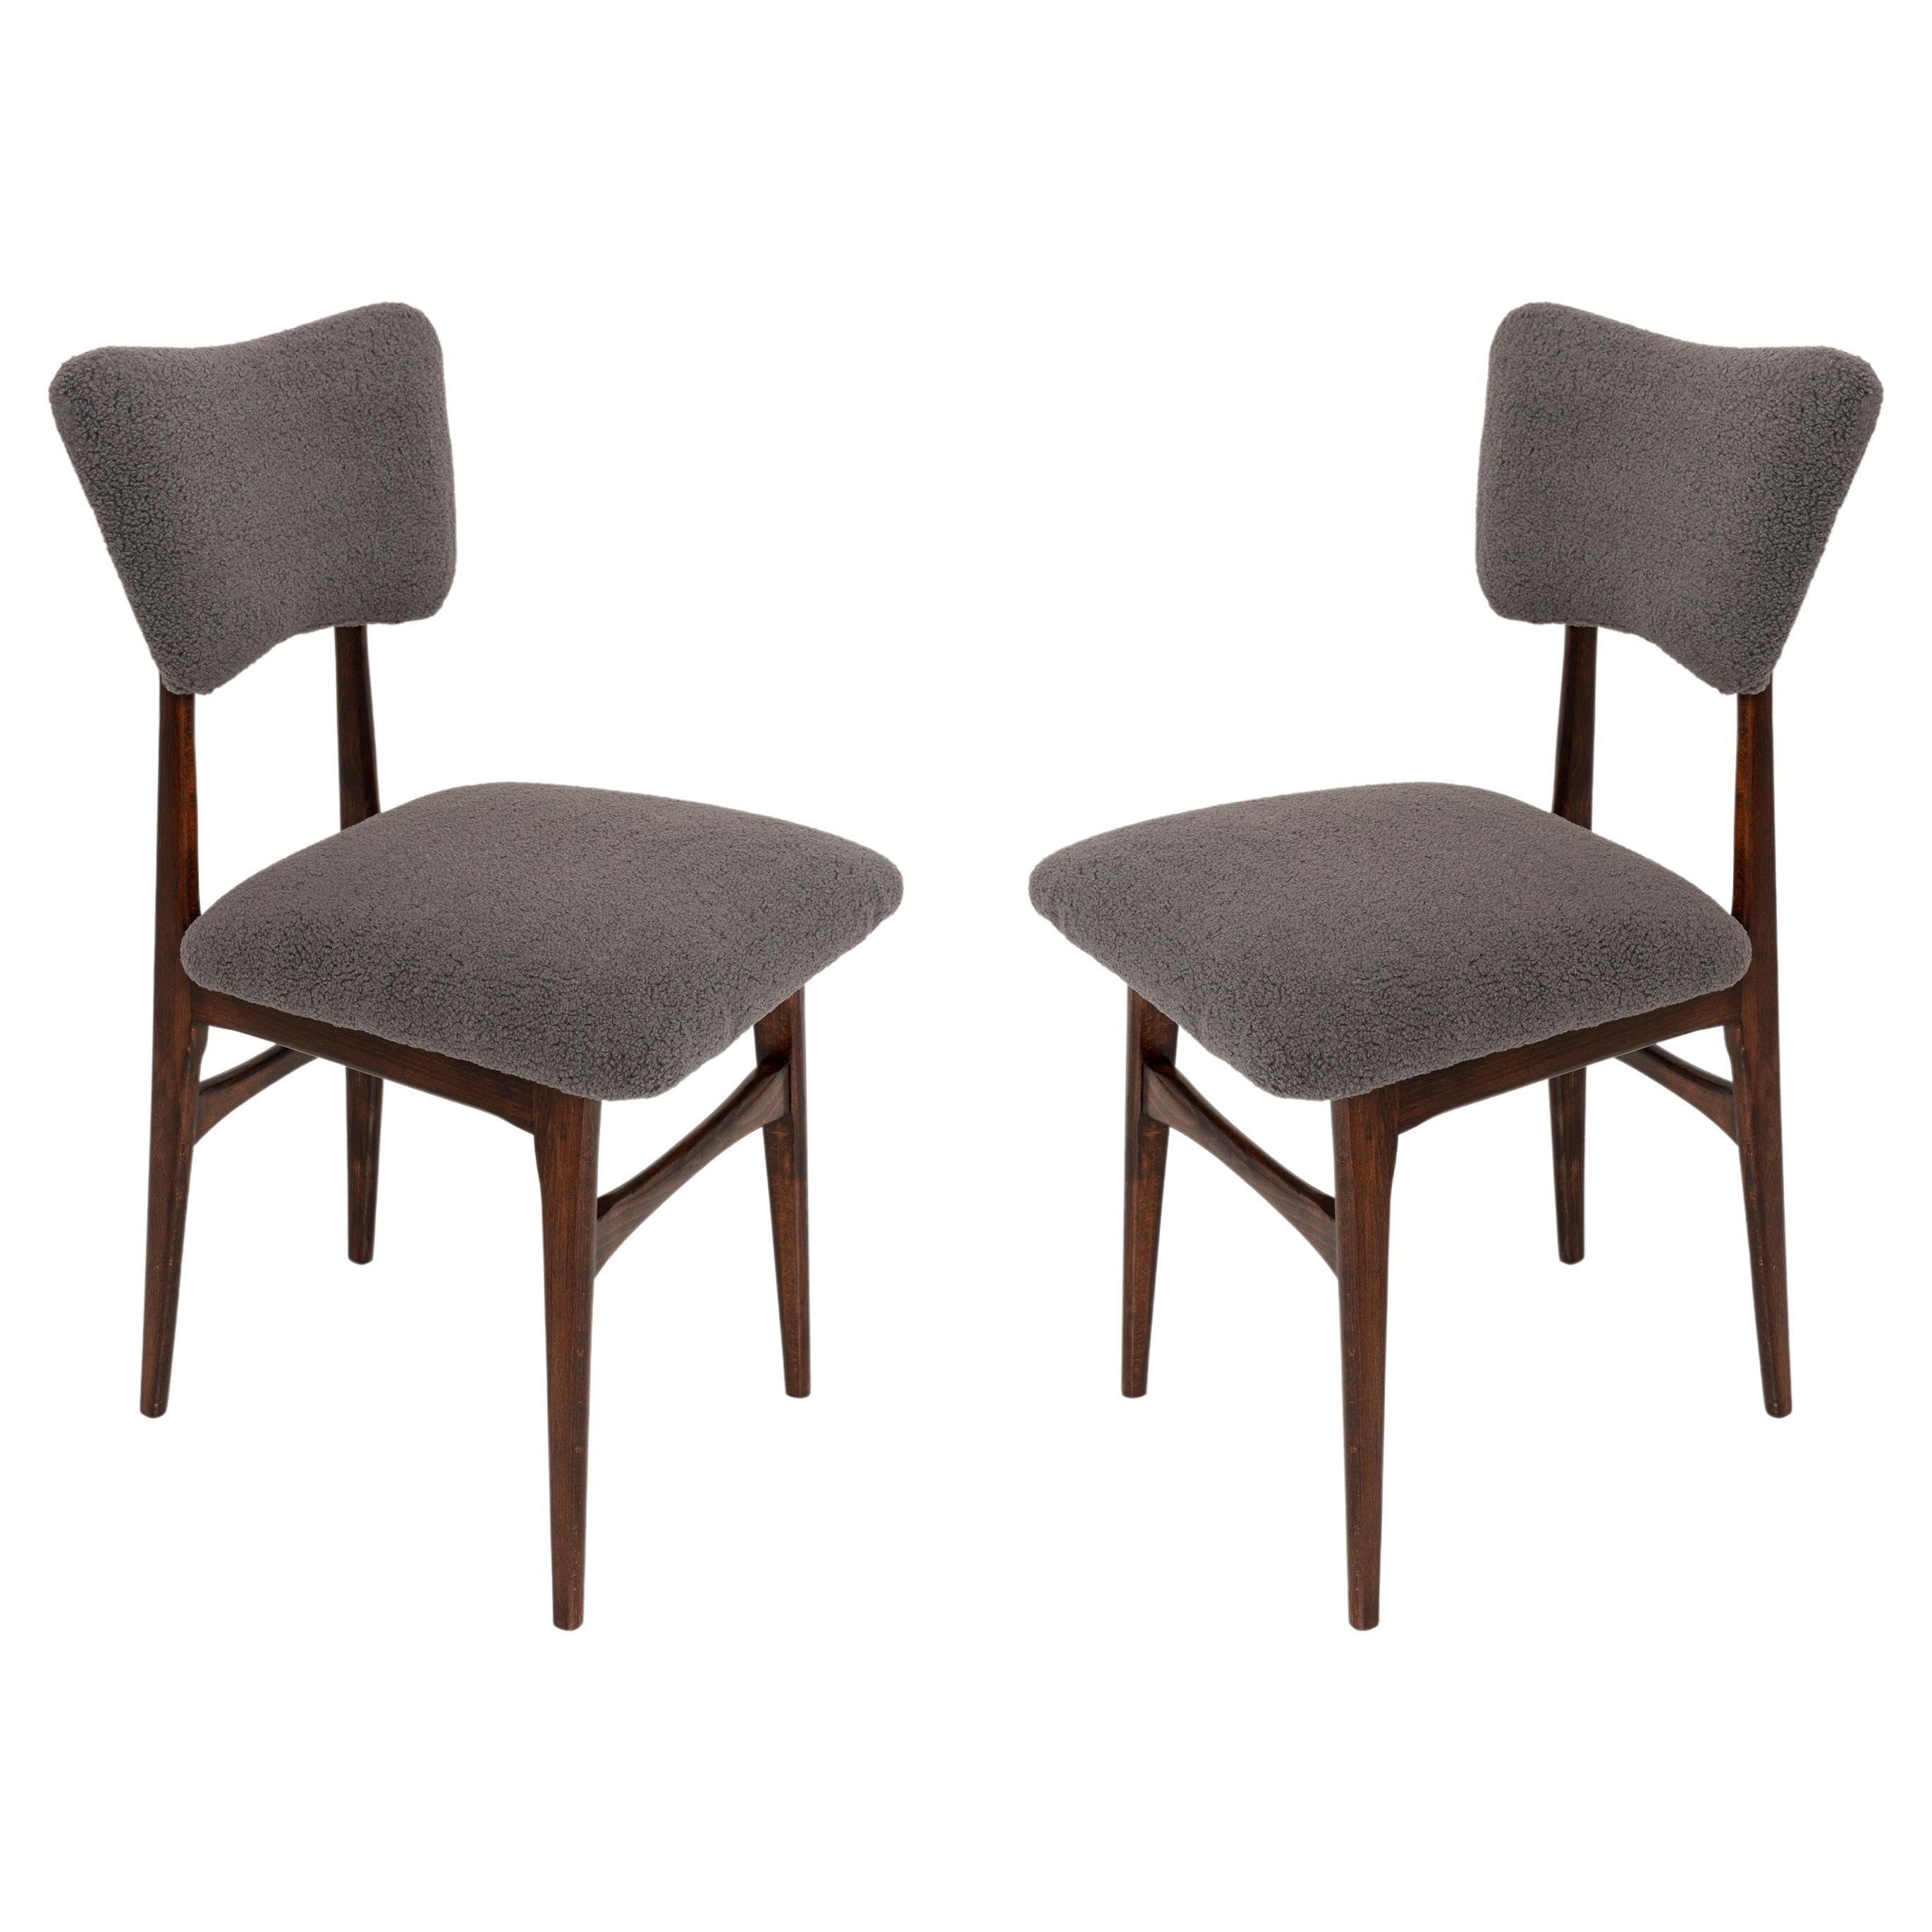 Set of Two 20th Century Chairs in Dark Boucle, Europe, 1960s For Sale